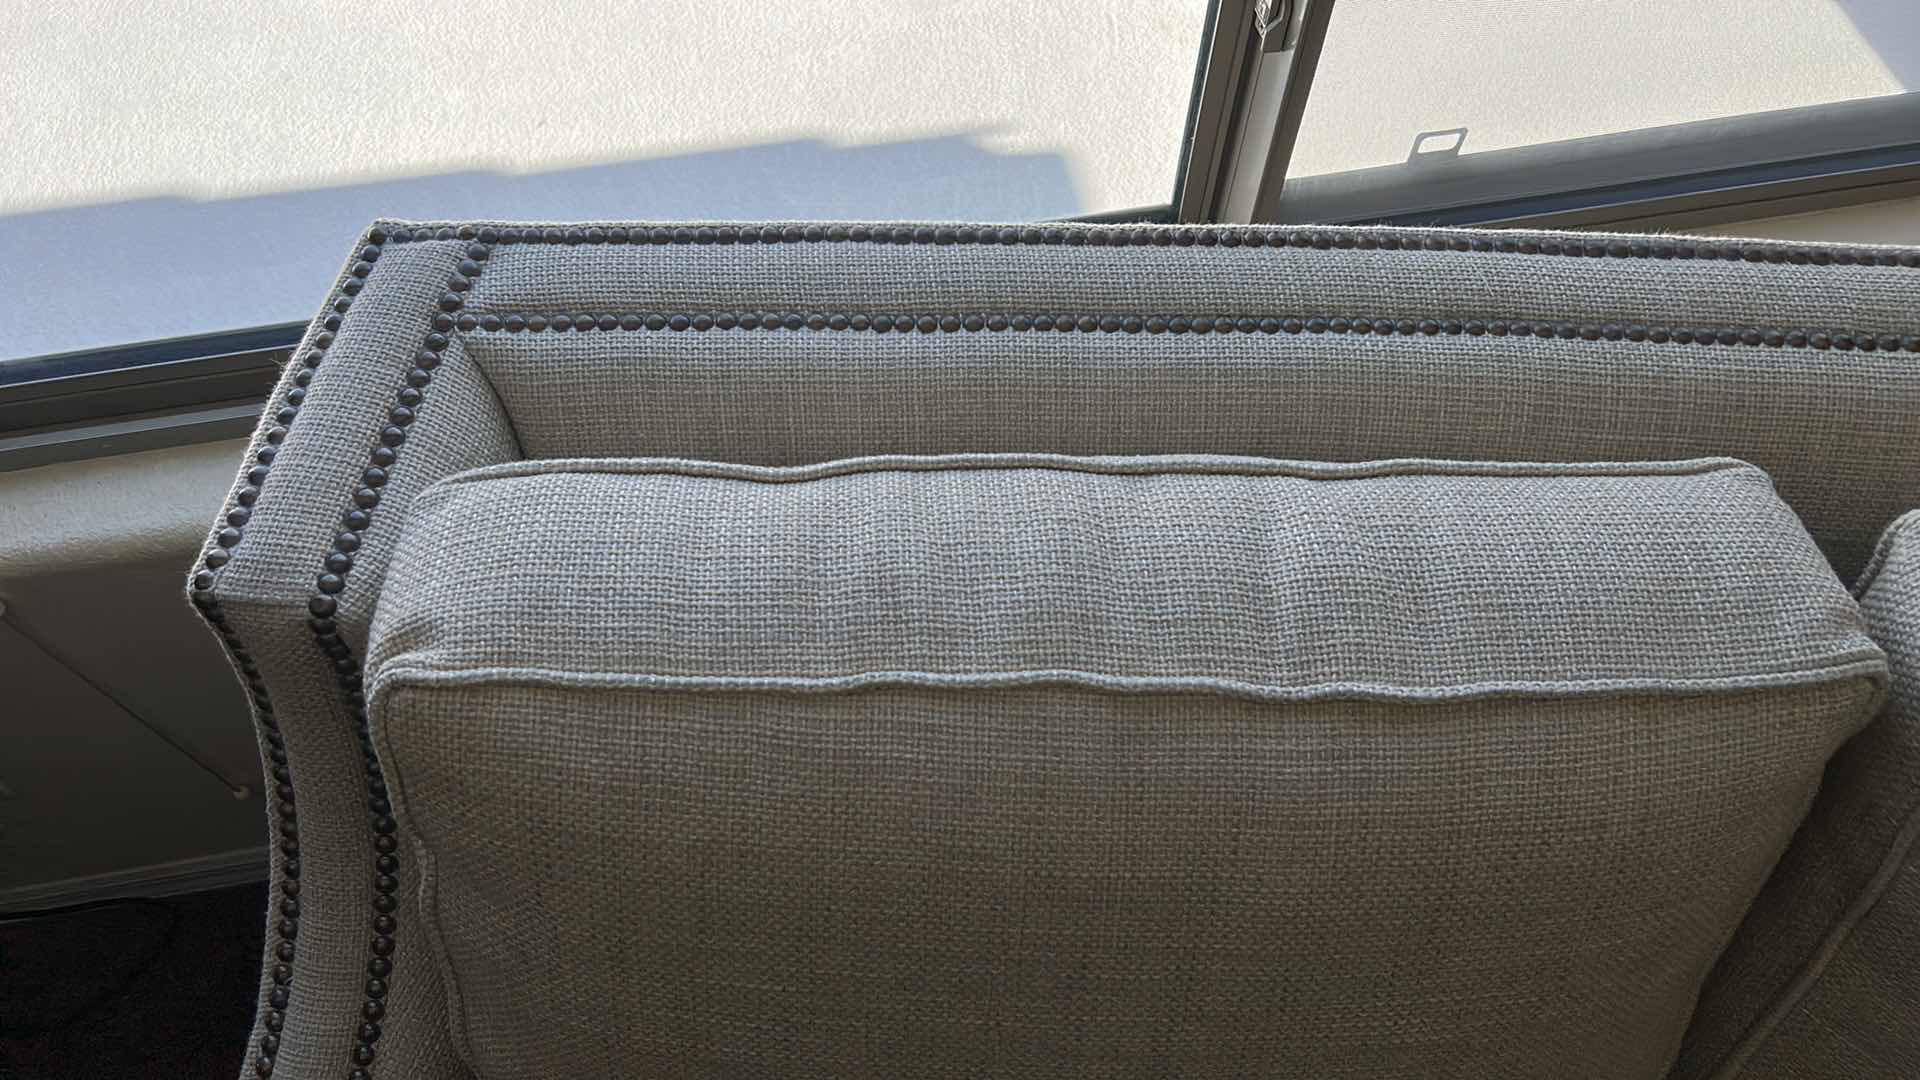 Photo 5 of 7' SOFA-  LEXINGTON UPHOLSTERY MADE IN USA OFF WHITE TEXTURED LINEN WITH NAIL HEAD FINISH